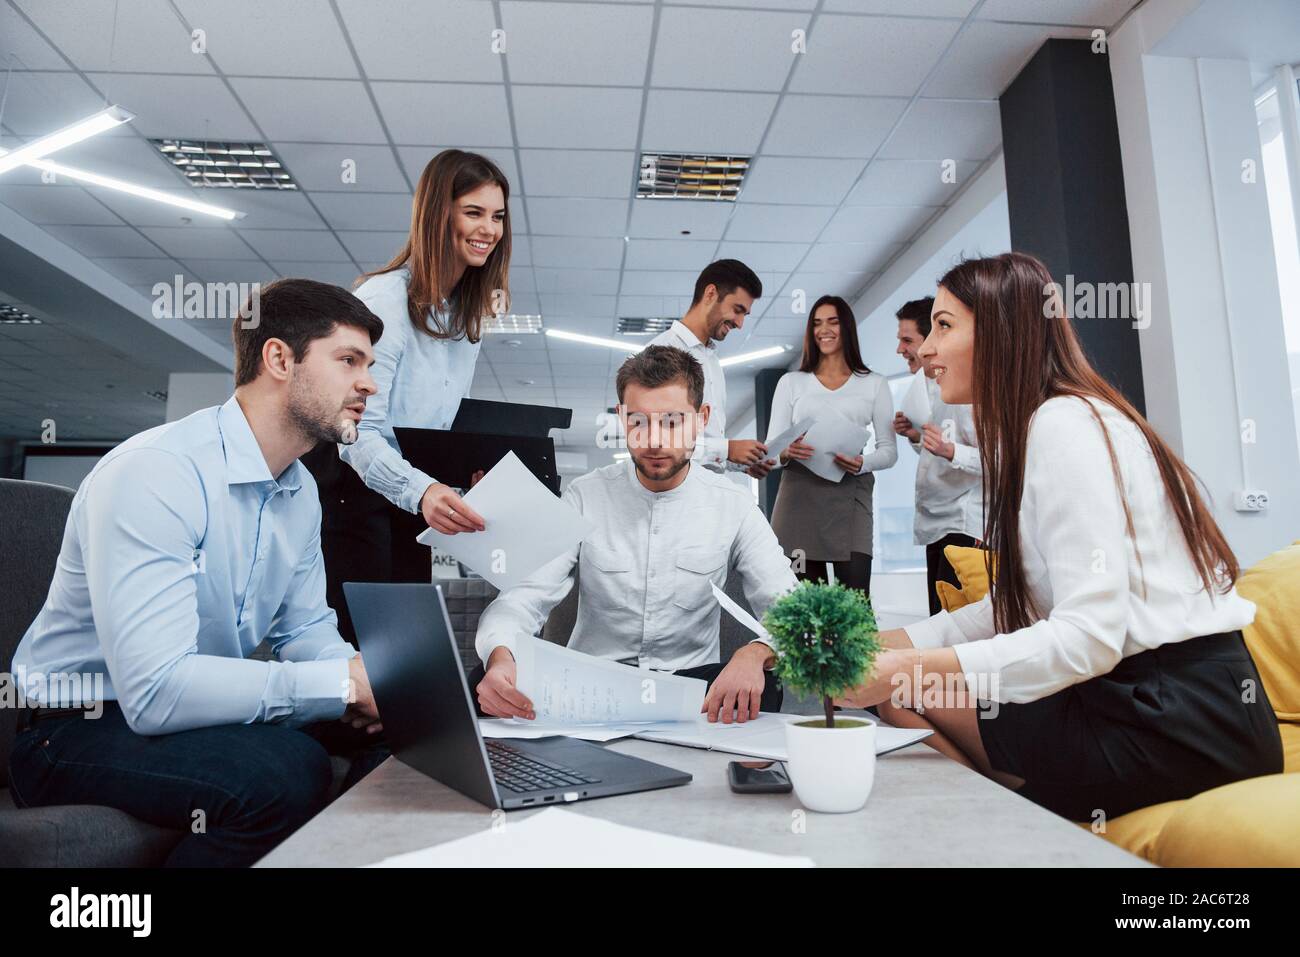 Unity of people for the sake of a great ideas. Group of young freelancers in the office have conversation and smiling Stock Photo